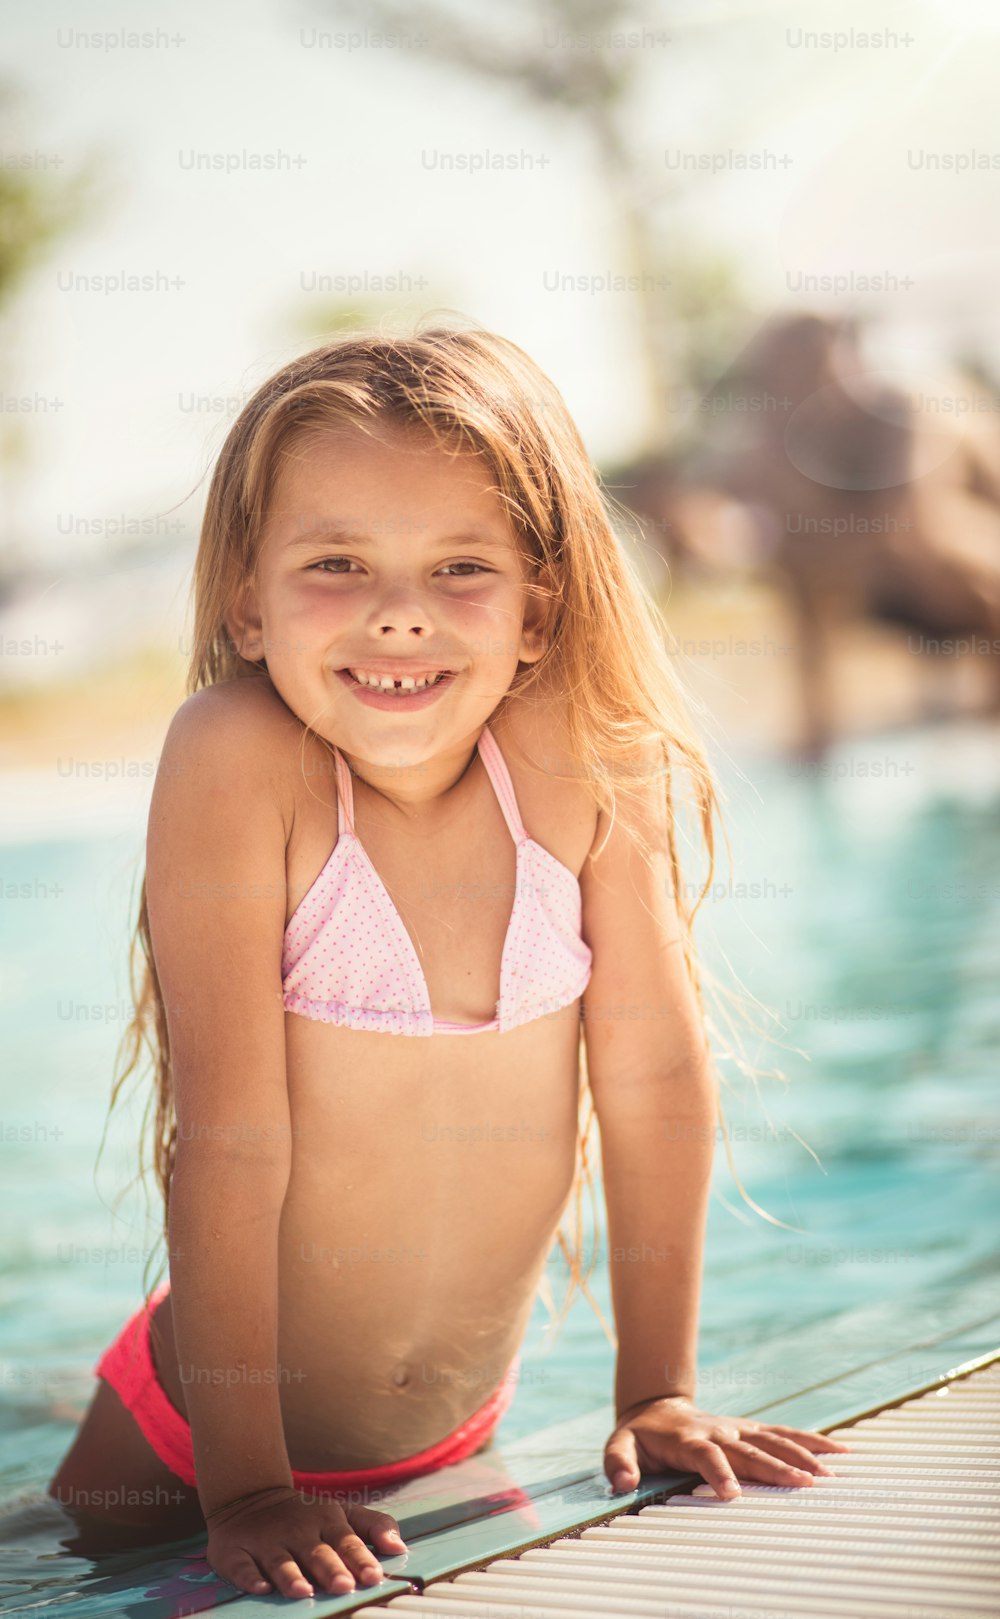 Weekend is created for relax. Child in the pool.